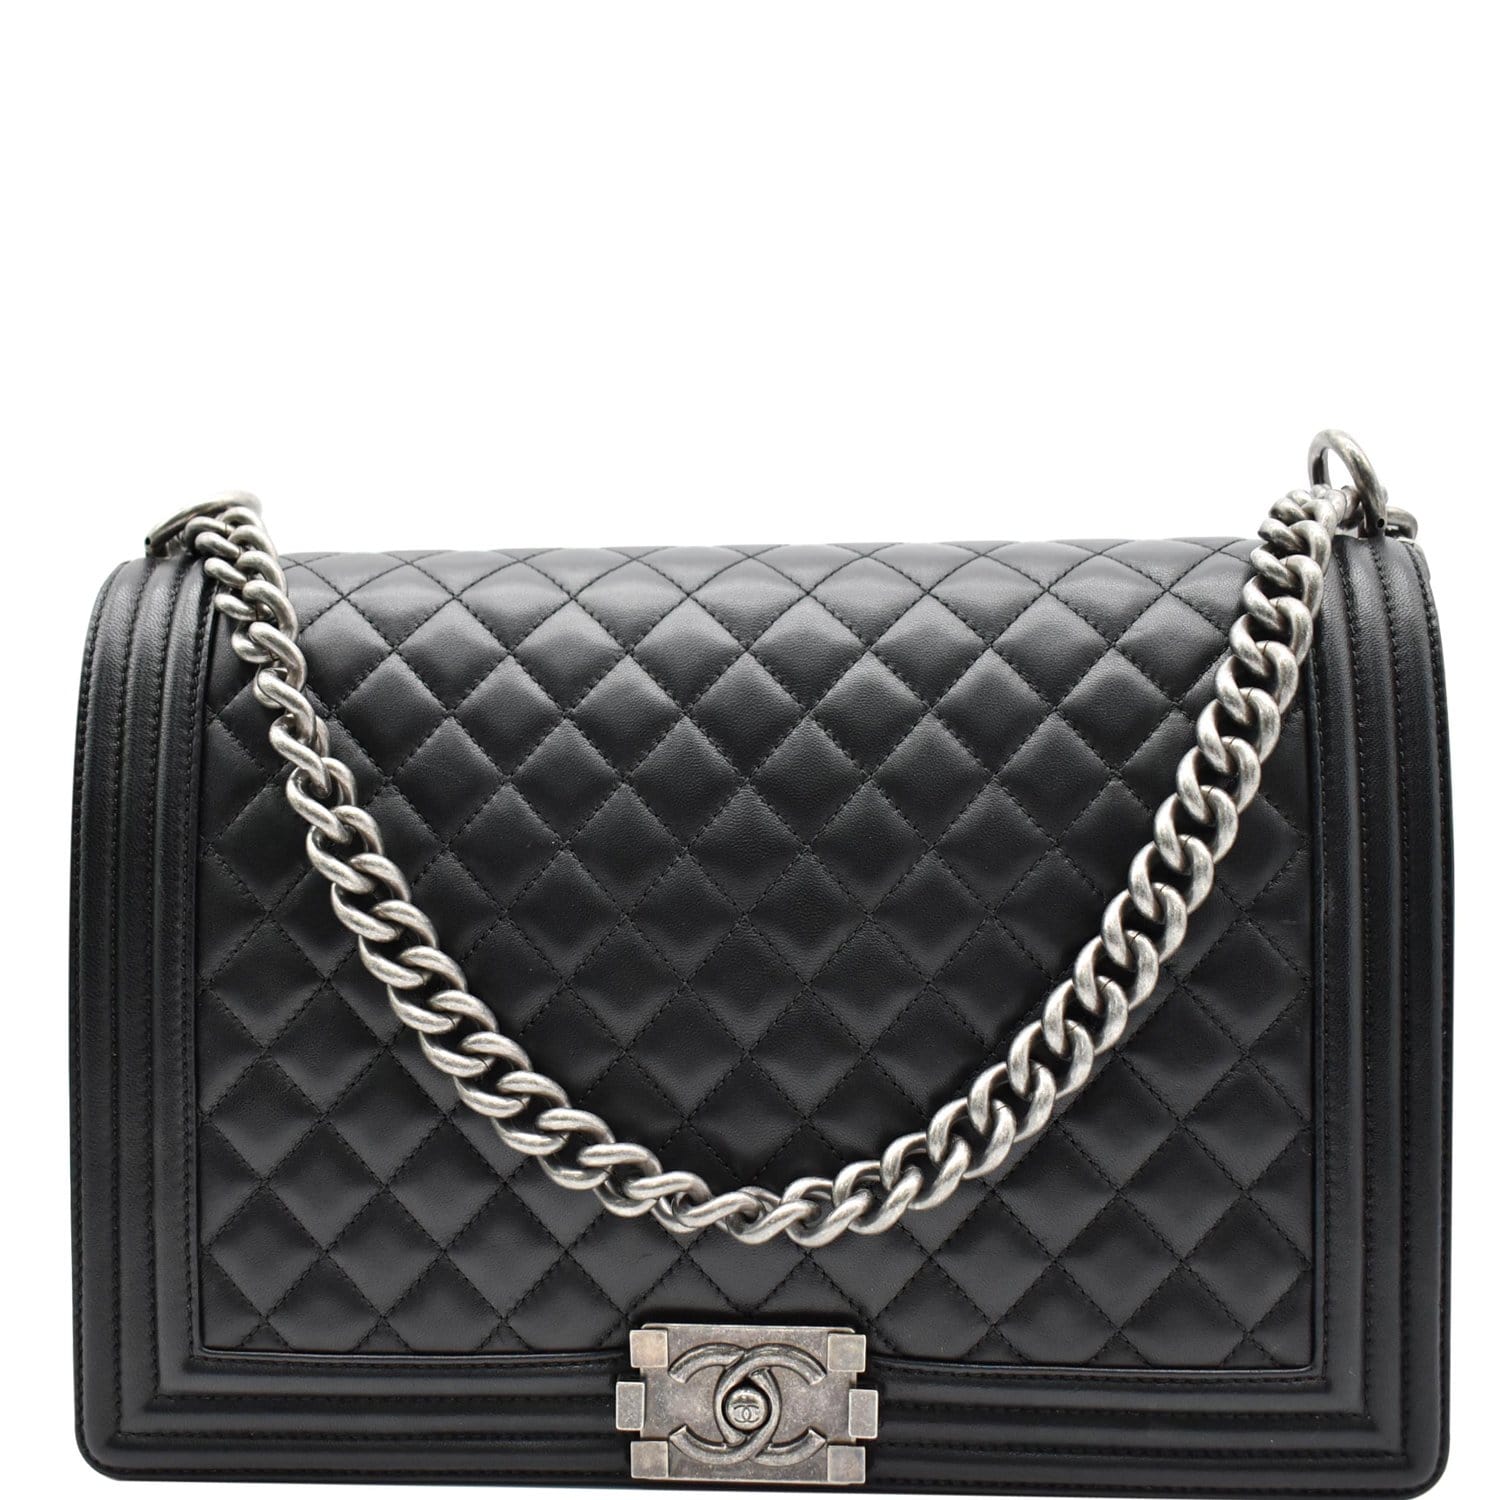 White Chanel Medium Quilted Boy Flap Bag